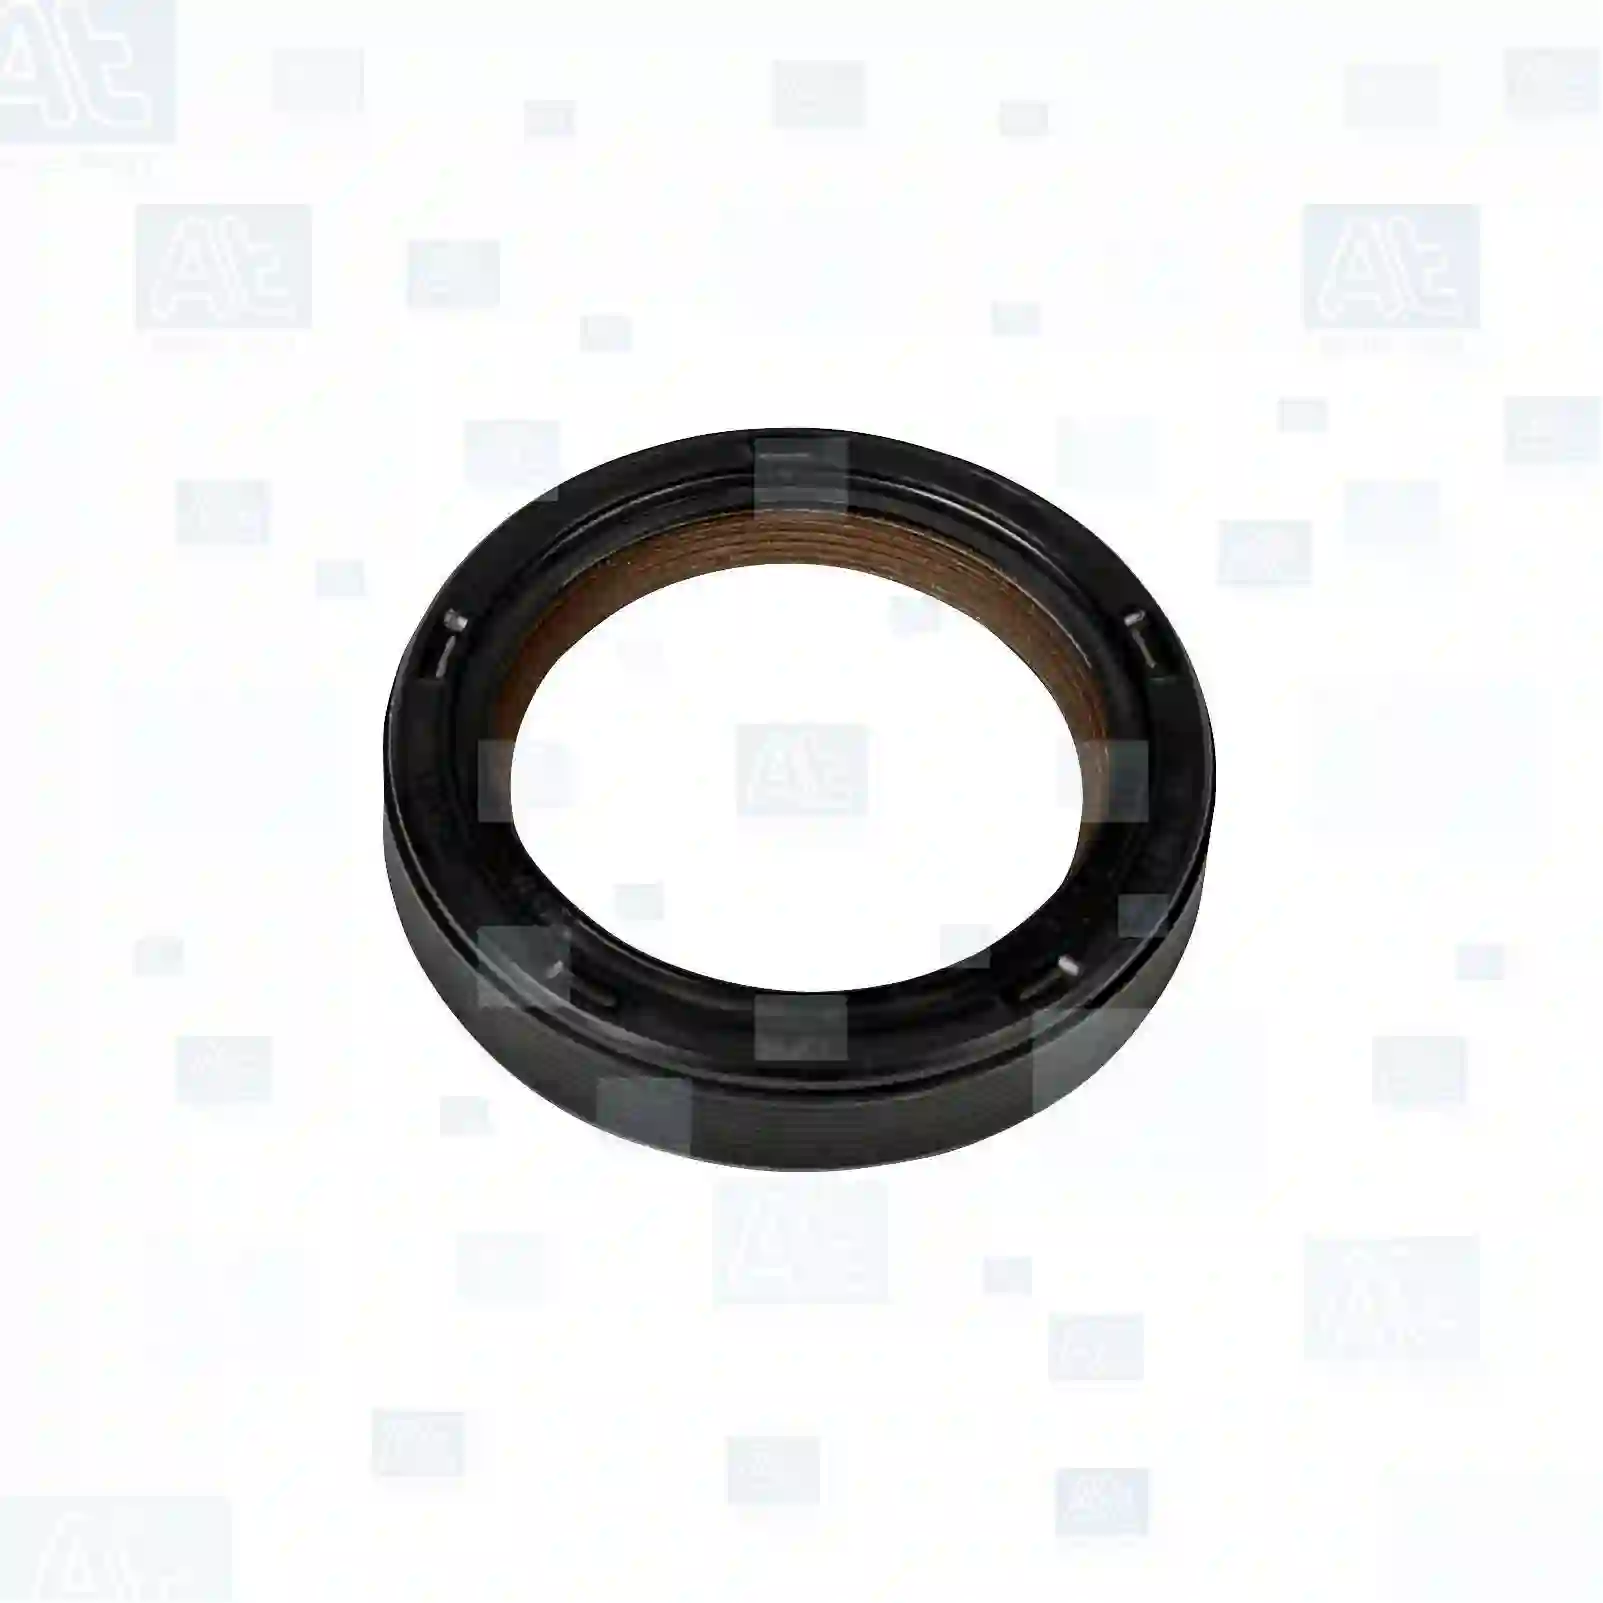 Oil seal, at no 77704054, oem no: 038103085, 038103085B, 038103085E, 03G103295D, 03G105021C, 03G105173, 03G198998F, 06D103151, 06D103151B, 1100691, 1215960, 2M21-6700-AA, MN980009, 95510108500, 038103085, 038103085E, 03D105171B, 038103085E, 038103151, 038103153A, 038103153B, 038103085, 038103085B, 038103085E, 038103151, 038103153A, 038103153B, 03D105171B, 03G103295D, 03G105021C, 03G105173, 03G198998F, 06D103151, 06D103151B, ZG02625-0008 At Spare Part | Engine, Accelerator Pedal, Camshaft, Connecting Rod, Crankcase, Crankshaft, Cylinder Head, Engine Suspension Mountings, Exhaust Manifold, Exhaust Gas Recirculation, Filter Kits, Flywheel Housing, General Overhaul Kits, Engine, Intake Manifold, Oil Cleaner, Oil Cooler, Oil Filter, Oil Pump, Oil Sump, Piston & Liner, Sensor & Switch, Timing Case, Turbocharger, Cooling System, Belt Tensioner, Coolant Filter, Coolant Pipe, Corrosion Prevention Agent, Drive, Expansion Tank, Fan, Intercooler, Monitors & Gauges, Radiator, Thermostat, V-Belt / Timing belt, Water Pump, Fuel System, Electronical Injector Unit, Feed Pump, Fuel Filter, cpl., Fuel Gauge Sender,  Fuel Line, Fuel Pump, Fuel Tank, Injection Line Kit, Injection Pump, Exhaust System, Clutch & Pedal, Gearbox, Propeller Shaft, Axles, Brake System, Hubs & Wheels, Suspension, Leaf Spring, Universal Parts / Accessories, Steering, Electrical System, Cabin Oil seal, at no 77704054, oem no: 038103085, 038103085B, 038103085E, 03G103295D, 03G105021C, 03G105173, 03G198998F, 06D103151, 06D103151B, 1100691, 1215960, 2M21-6700-AA, MN980009, 95510108500, 038103085, 038103085E, 03D105171B, 038103085E, 038103151, 038103153A, 038103153B, 038103085, 038103085B, 038103085E, 038103151, 038103153A, 038103153B, 03D105171B, 03G103295D, 03G105021C, 03G105173, 03G198998F, 06D103151, 06D103151B, ZG02625-0008 At Spare Part | Engine, Accelerator Pedal, Camshaft, Connecting Rod, Crankcase, Crankshaft, Cylinder Head, Engine Suspension Mountings, Exhaust Manifold, Exhaust Gas Recirculation, Filter Kits, Flywheel Housing, General Overhaul Kits, Engine, Intake Manifold, Oil Cleaner, Oil Cooler, Oil Filter, Oil Pump, Oil Sump, Piston & Liner, Sensor & Switch, Timing Case, Turbocharger, Cooling System, Belt Tensioner, Coolant Filter, Coolant Pipe, Corrosion Prevention Agent, Drive, Expansion Tank, Fan, Intercooler, Monitors & Gauges, Radiator, Thermostat, V-Belt / Timing belt, Water Pump, Fuel System, Electronical Injector Unit, Feed Pump, Fuel Filter, cpl., Fuel Gauge Sender,  Fuel Line, Fuel Pump, Fuel Tank, Injection Line Kit, Injection Pump, Exhaust System, Clutch & Pedal, Gearbox, Propeller Shaft, Axles, Brake System, Hubs & Wheels, Suspension, Leaf Spring, Universal Parts / Accessories, Steering, Electrical System, Cabin